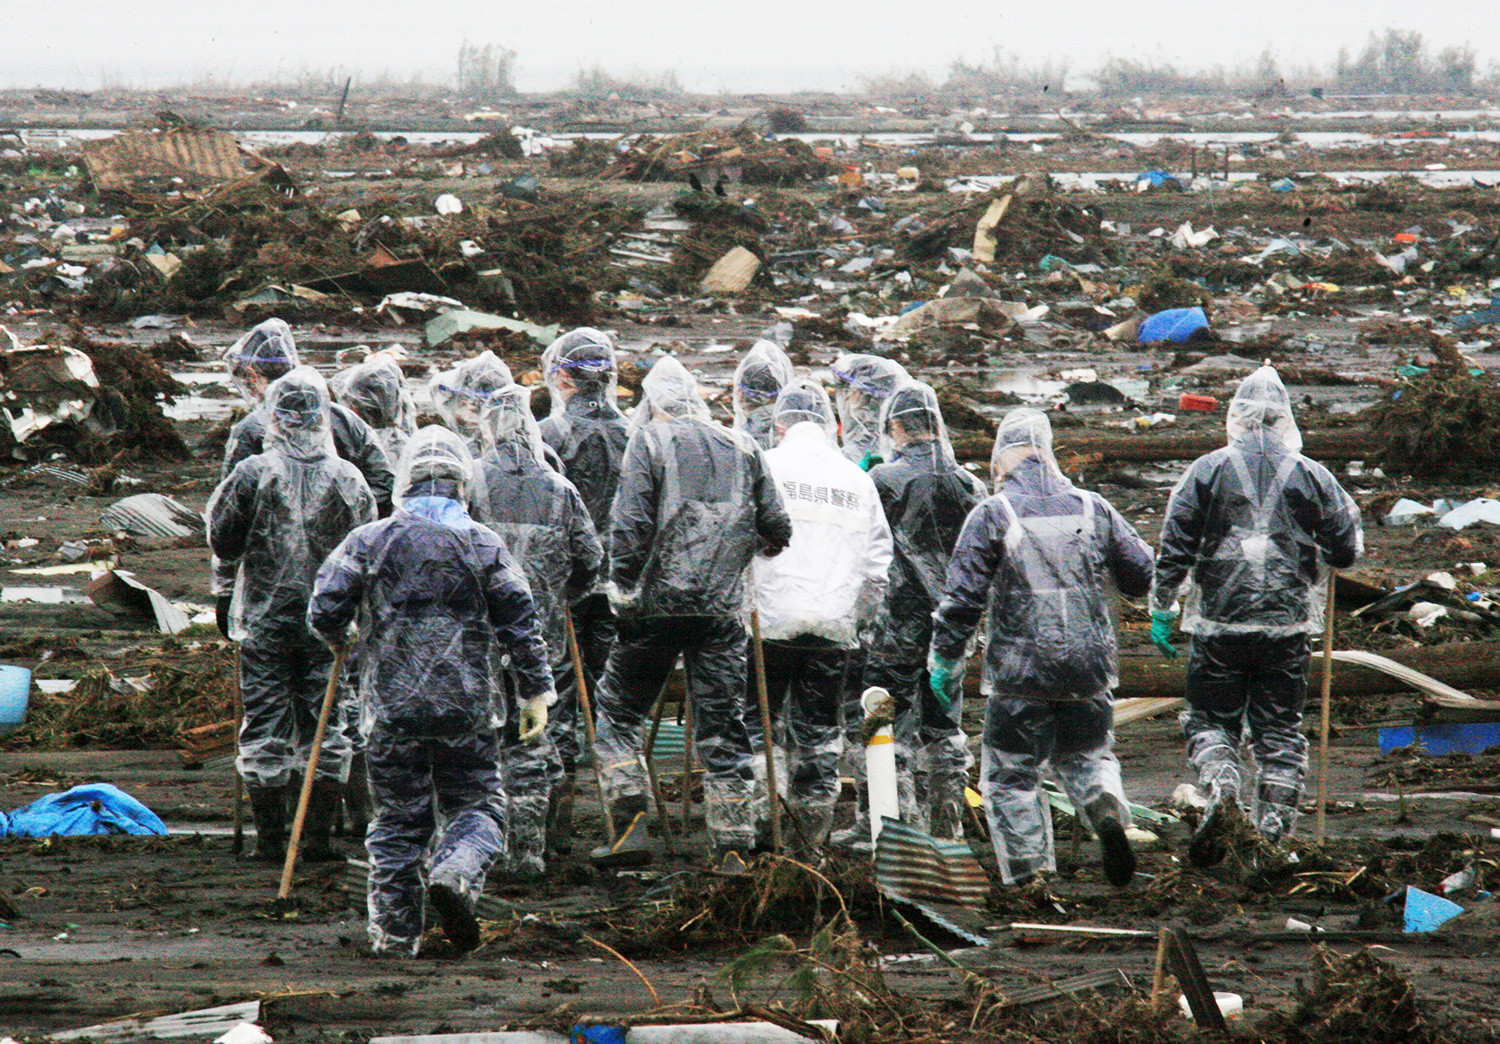 There were more Russian rescuer workers than from any other county dispatched to Japan 